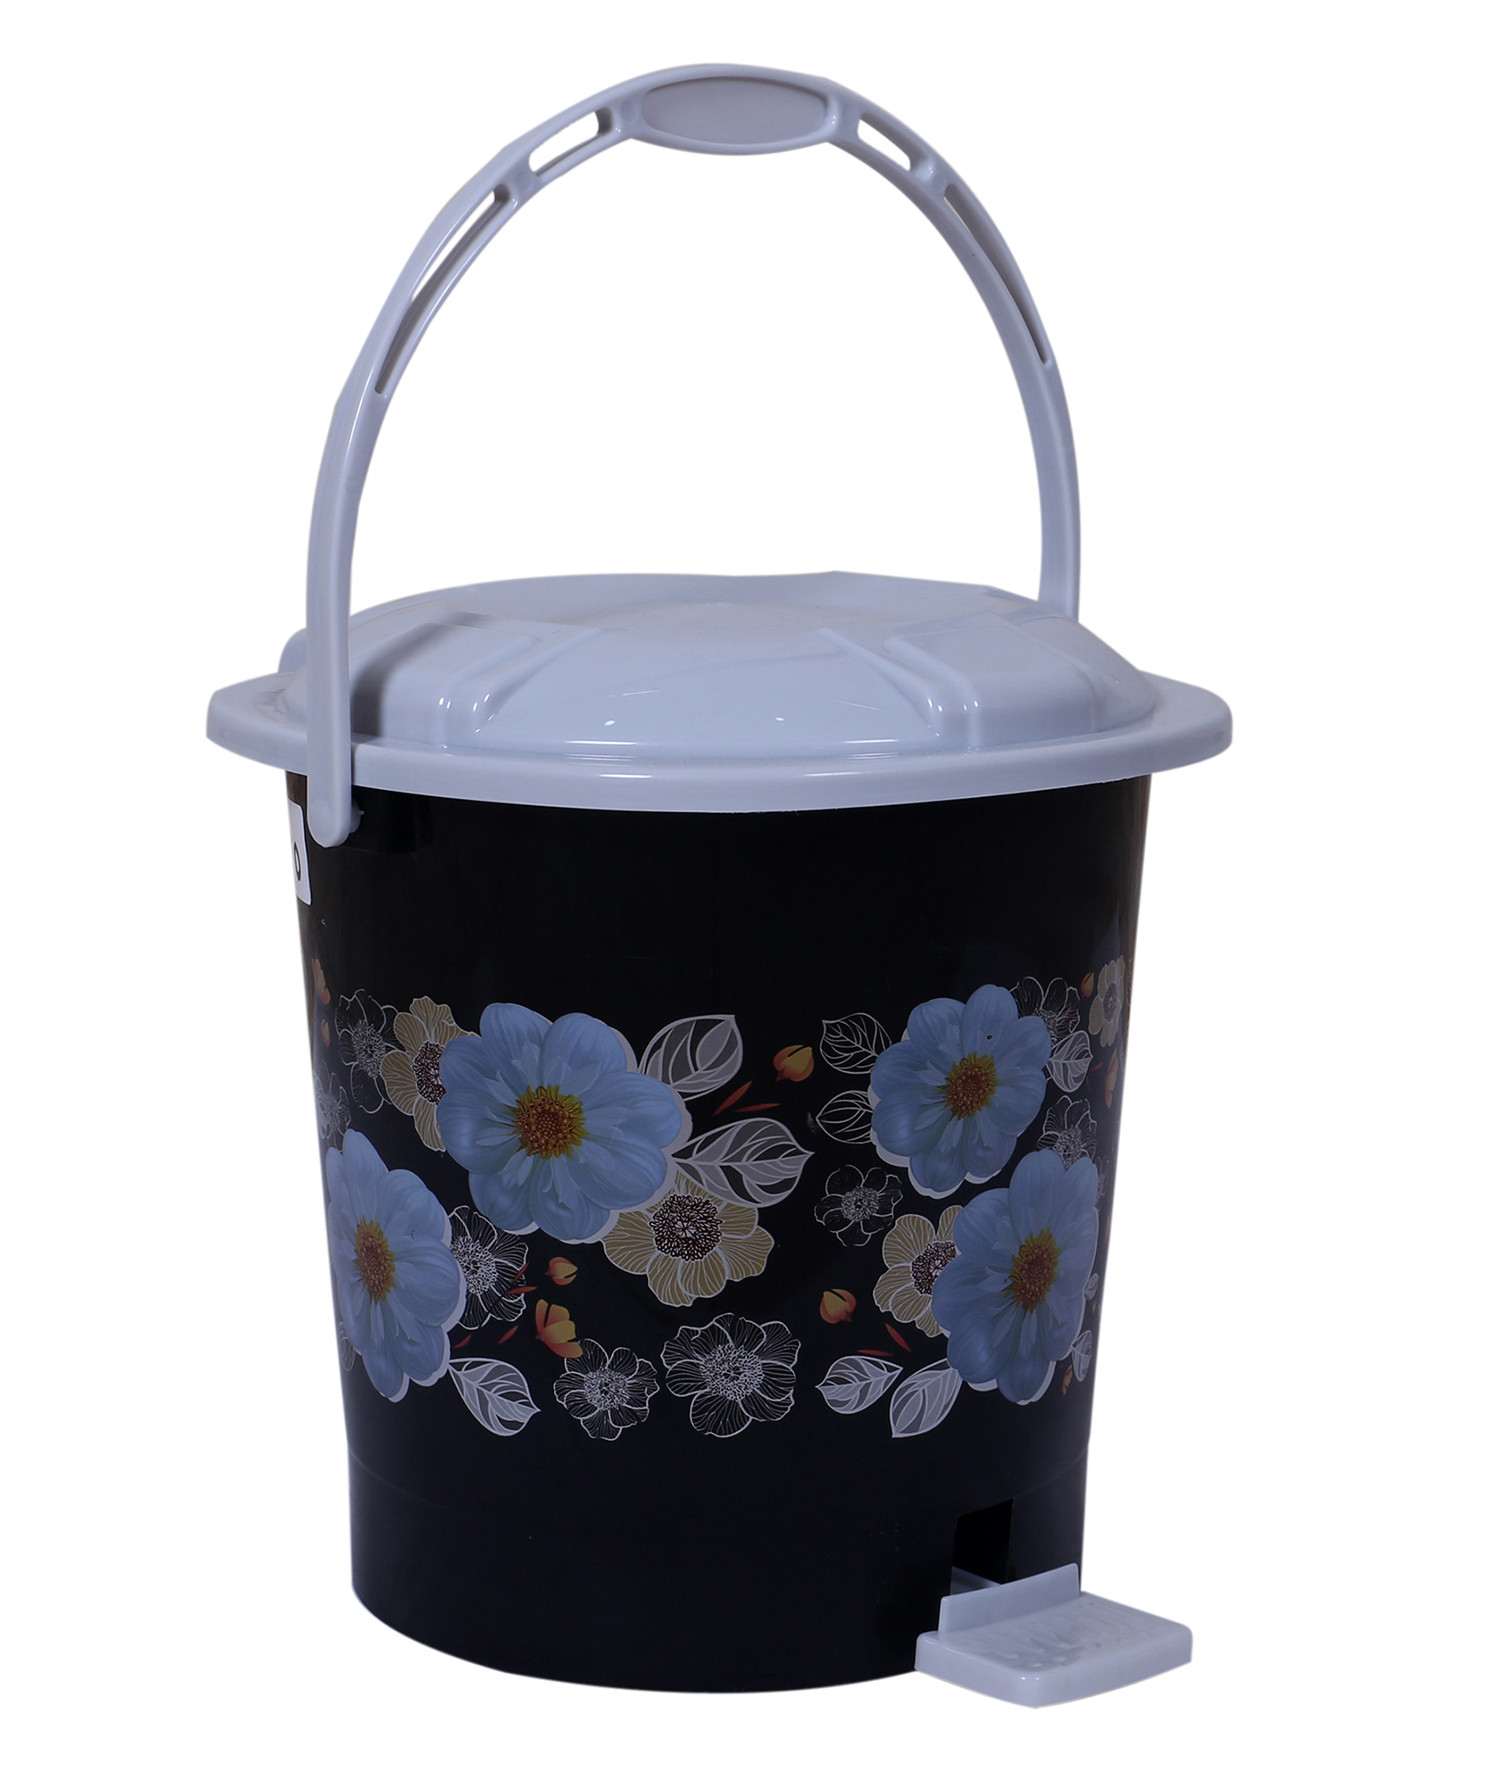 Kuber Industries Durable Flower Print Plastic Pedal Dustbin|Waste Bin|Trash Can For Kitchen & Home With Handle,10 Litre (Black)